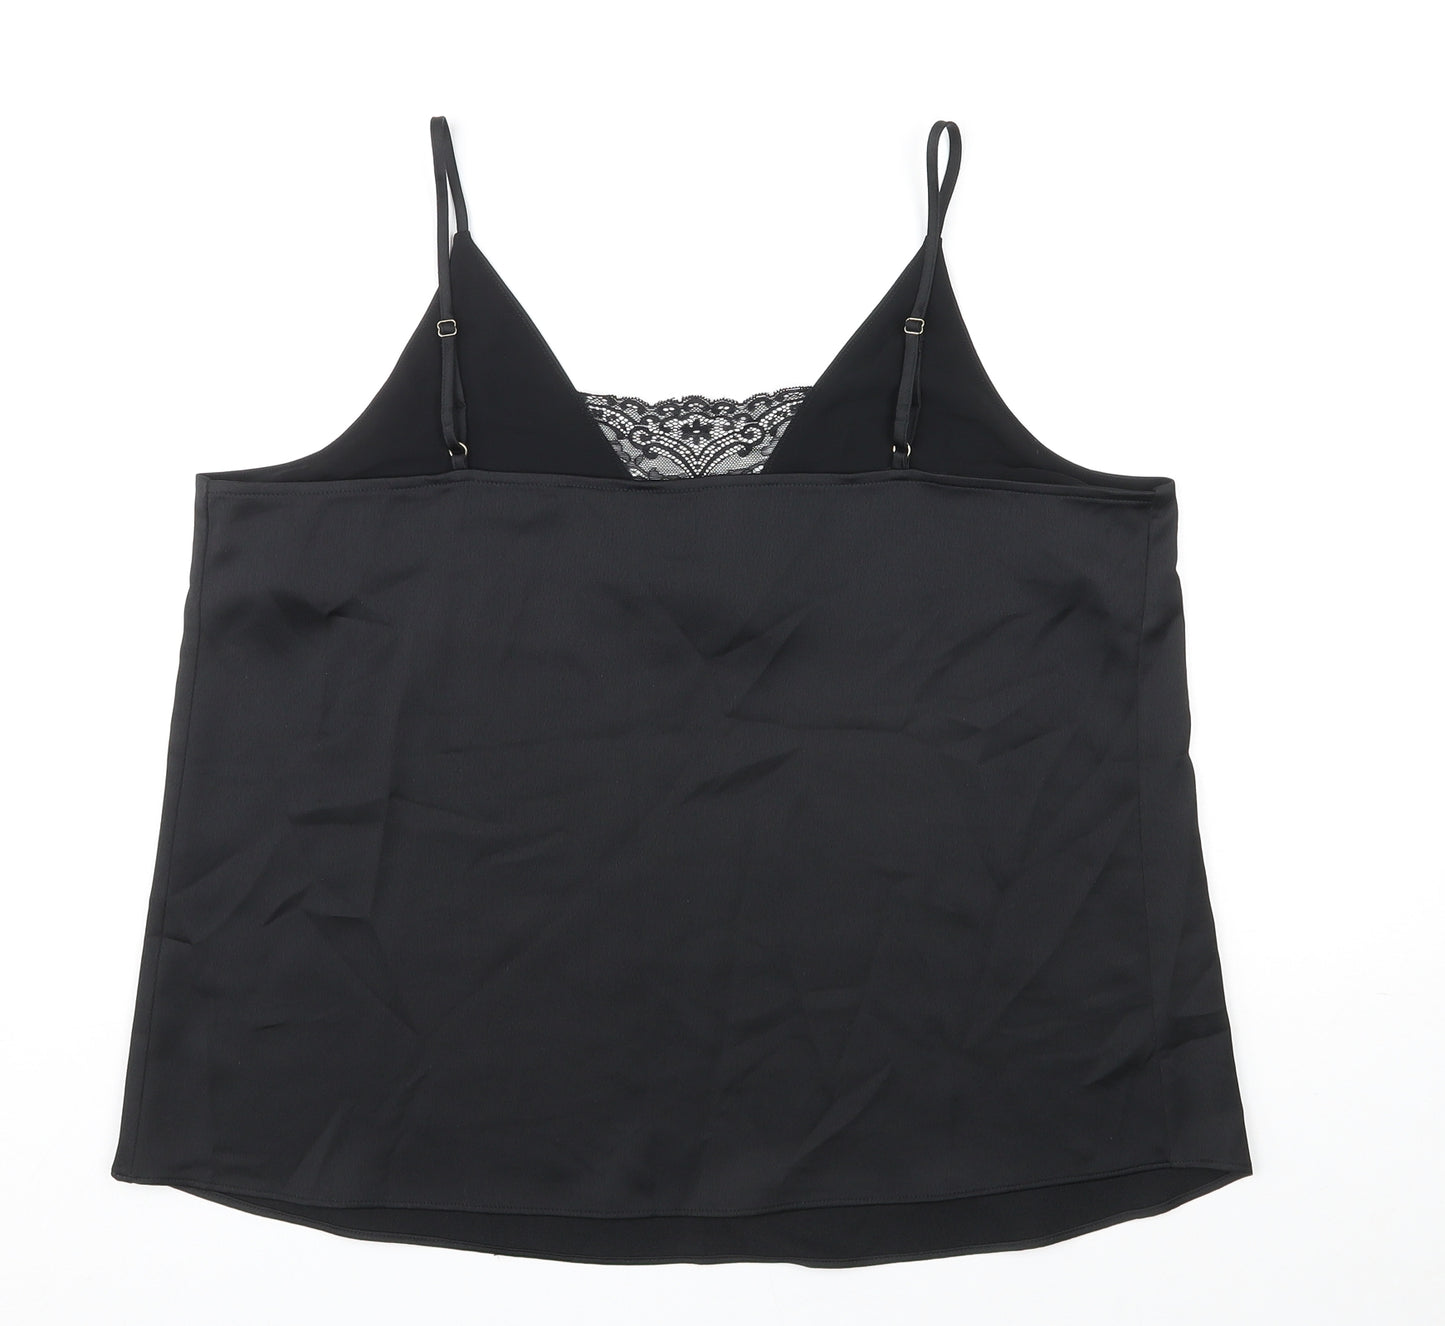 River Island Womens Black Polyester Camisole Tank Size 16 V-Neck - Lace Details